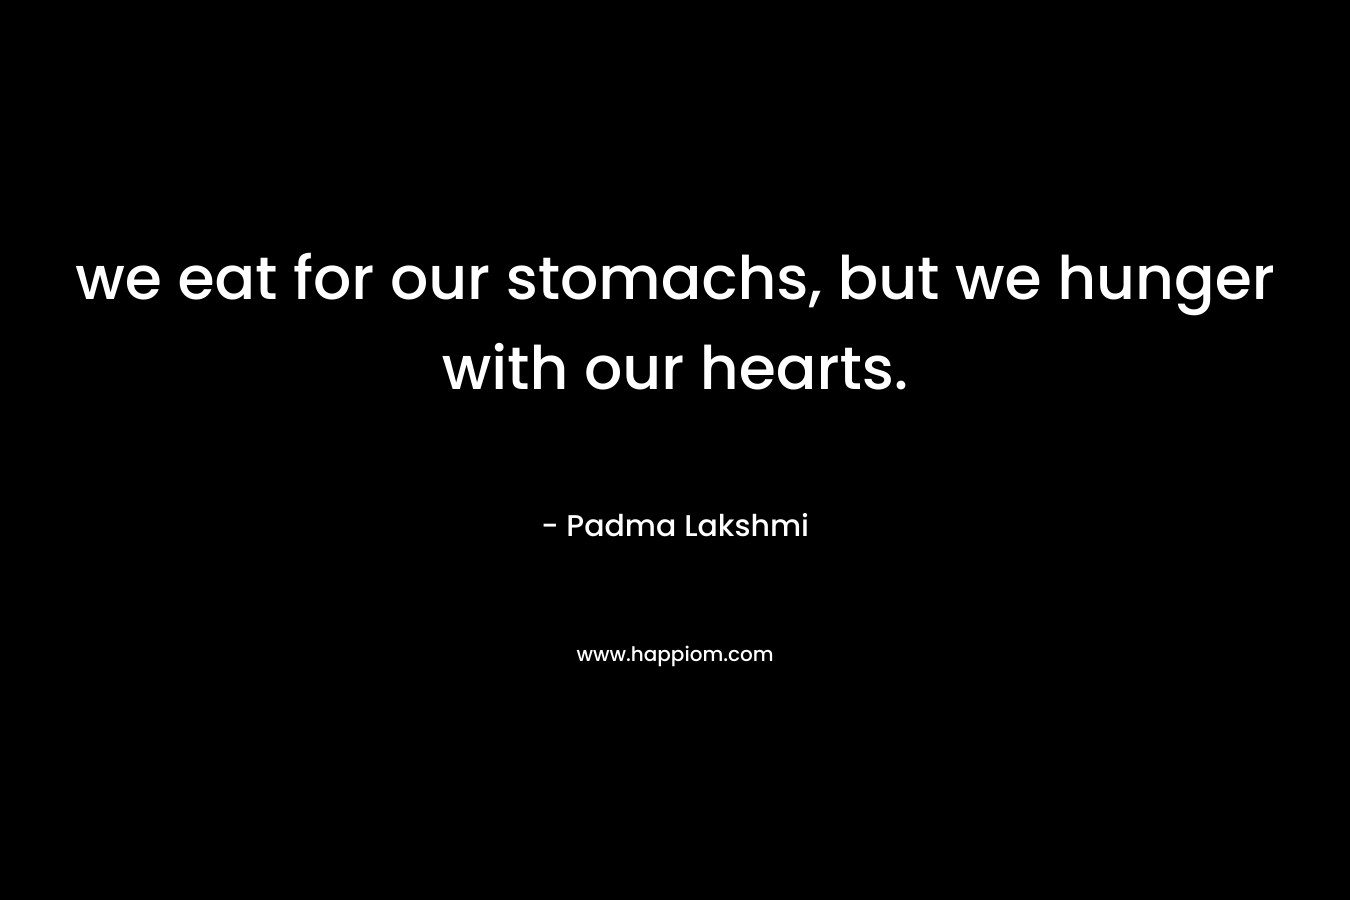 we eat for our stomachs, but we hunger with our hearts. – Padma Lakshmi